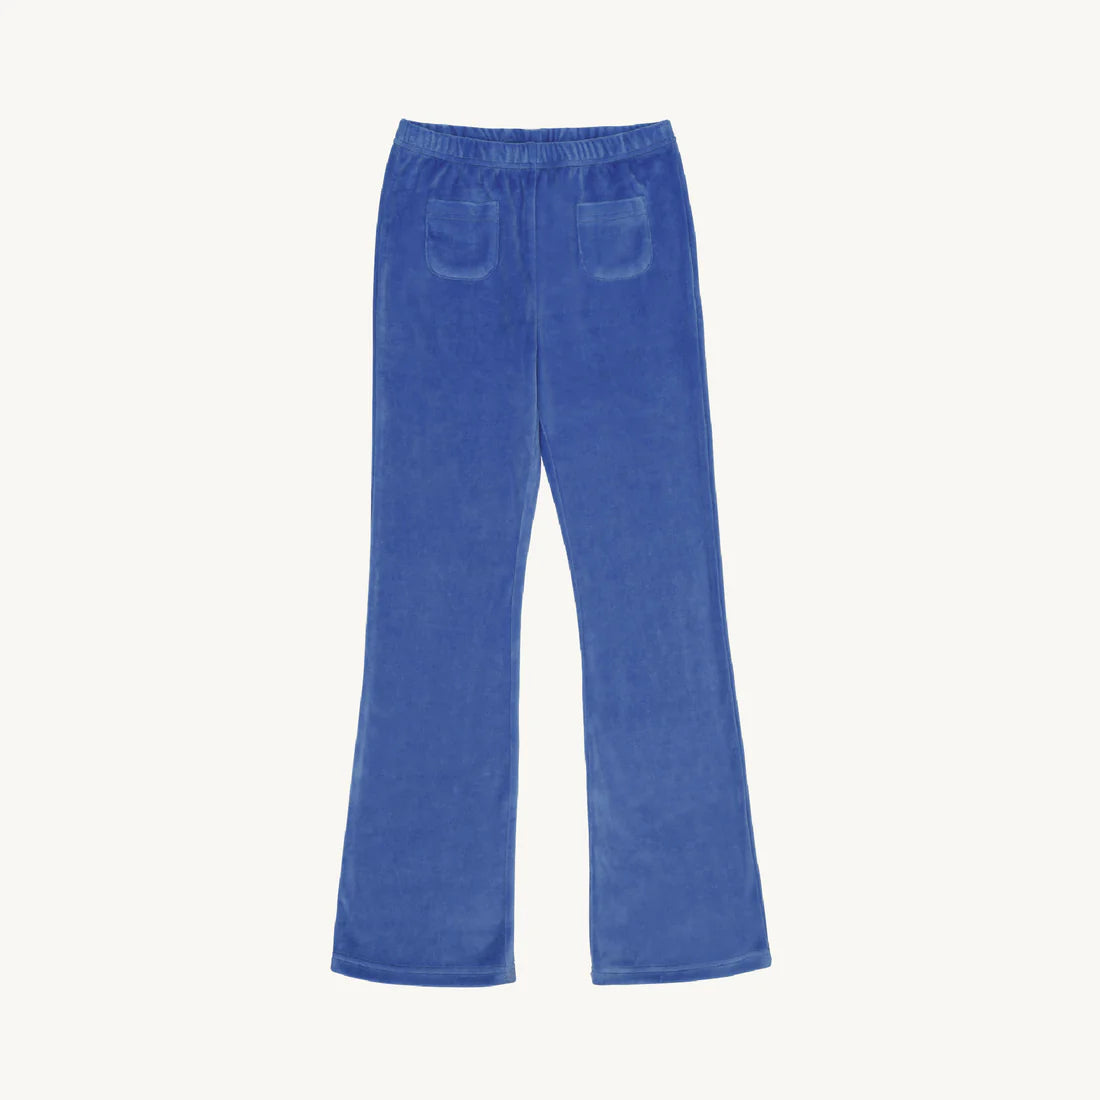 This picture shows a pair of bright blue velour flared pants for kids. Amazing fit